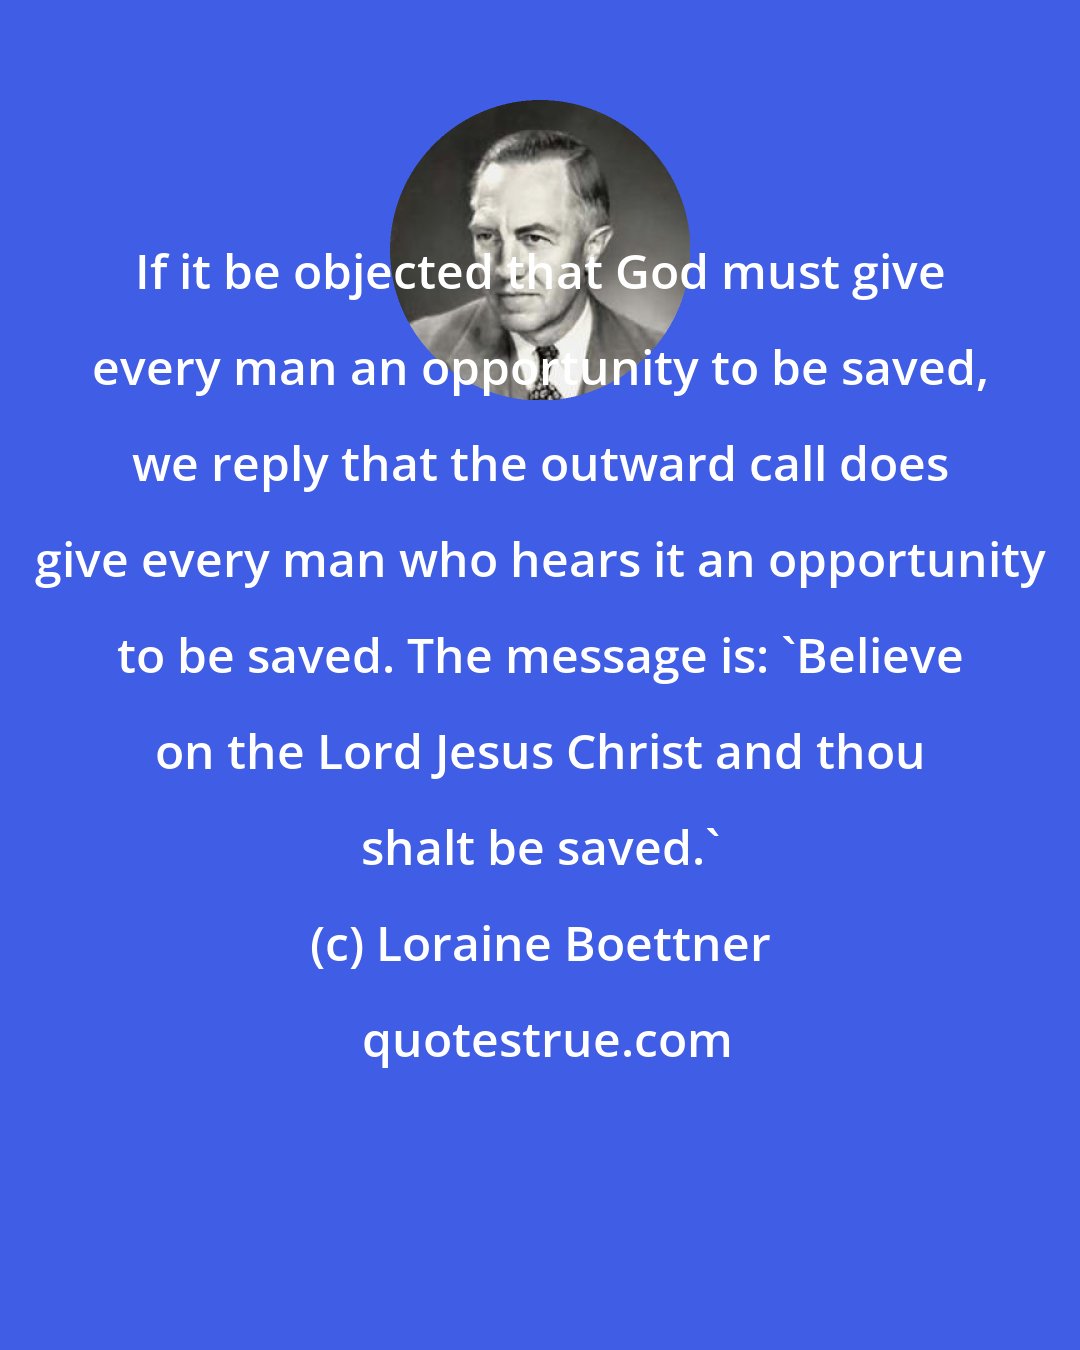 Loraine Boettner: If it be objected that God must give every man an opportunity to be saved, we reply that the outward call does give every man who hears it an opportunity to be saved. The message is: 'Believe on the Lord Jesus Christ and thou shalt be saved.'